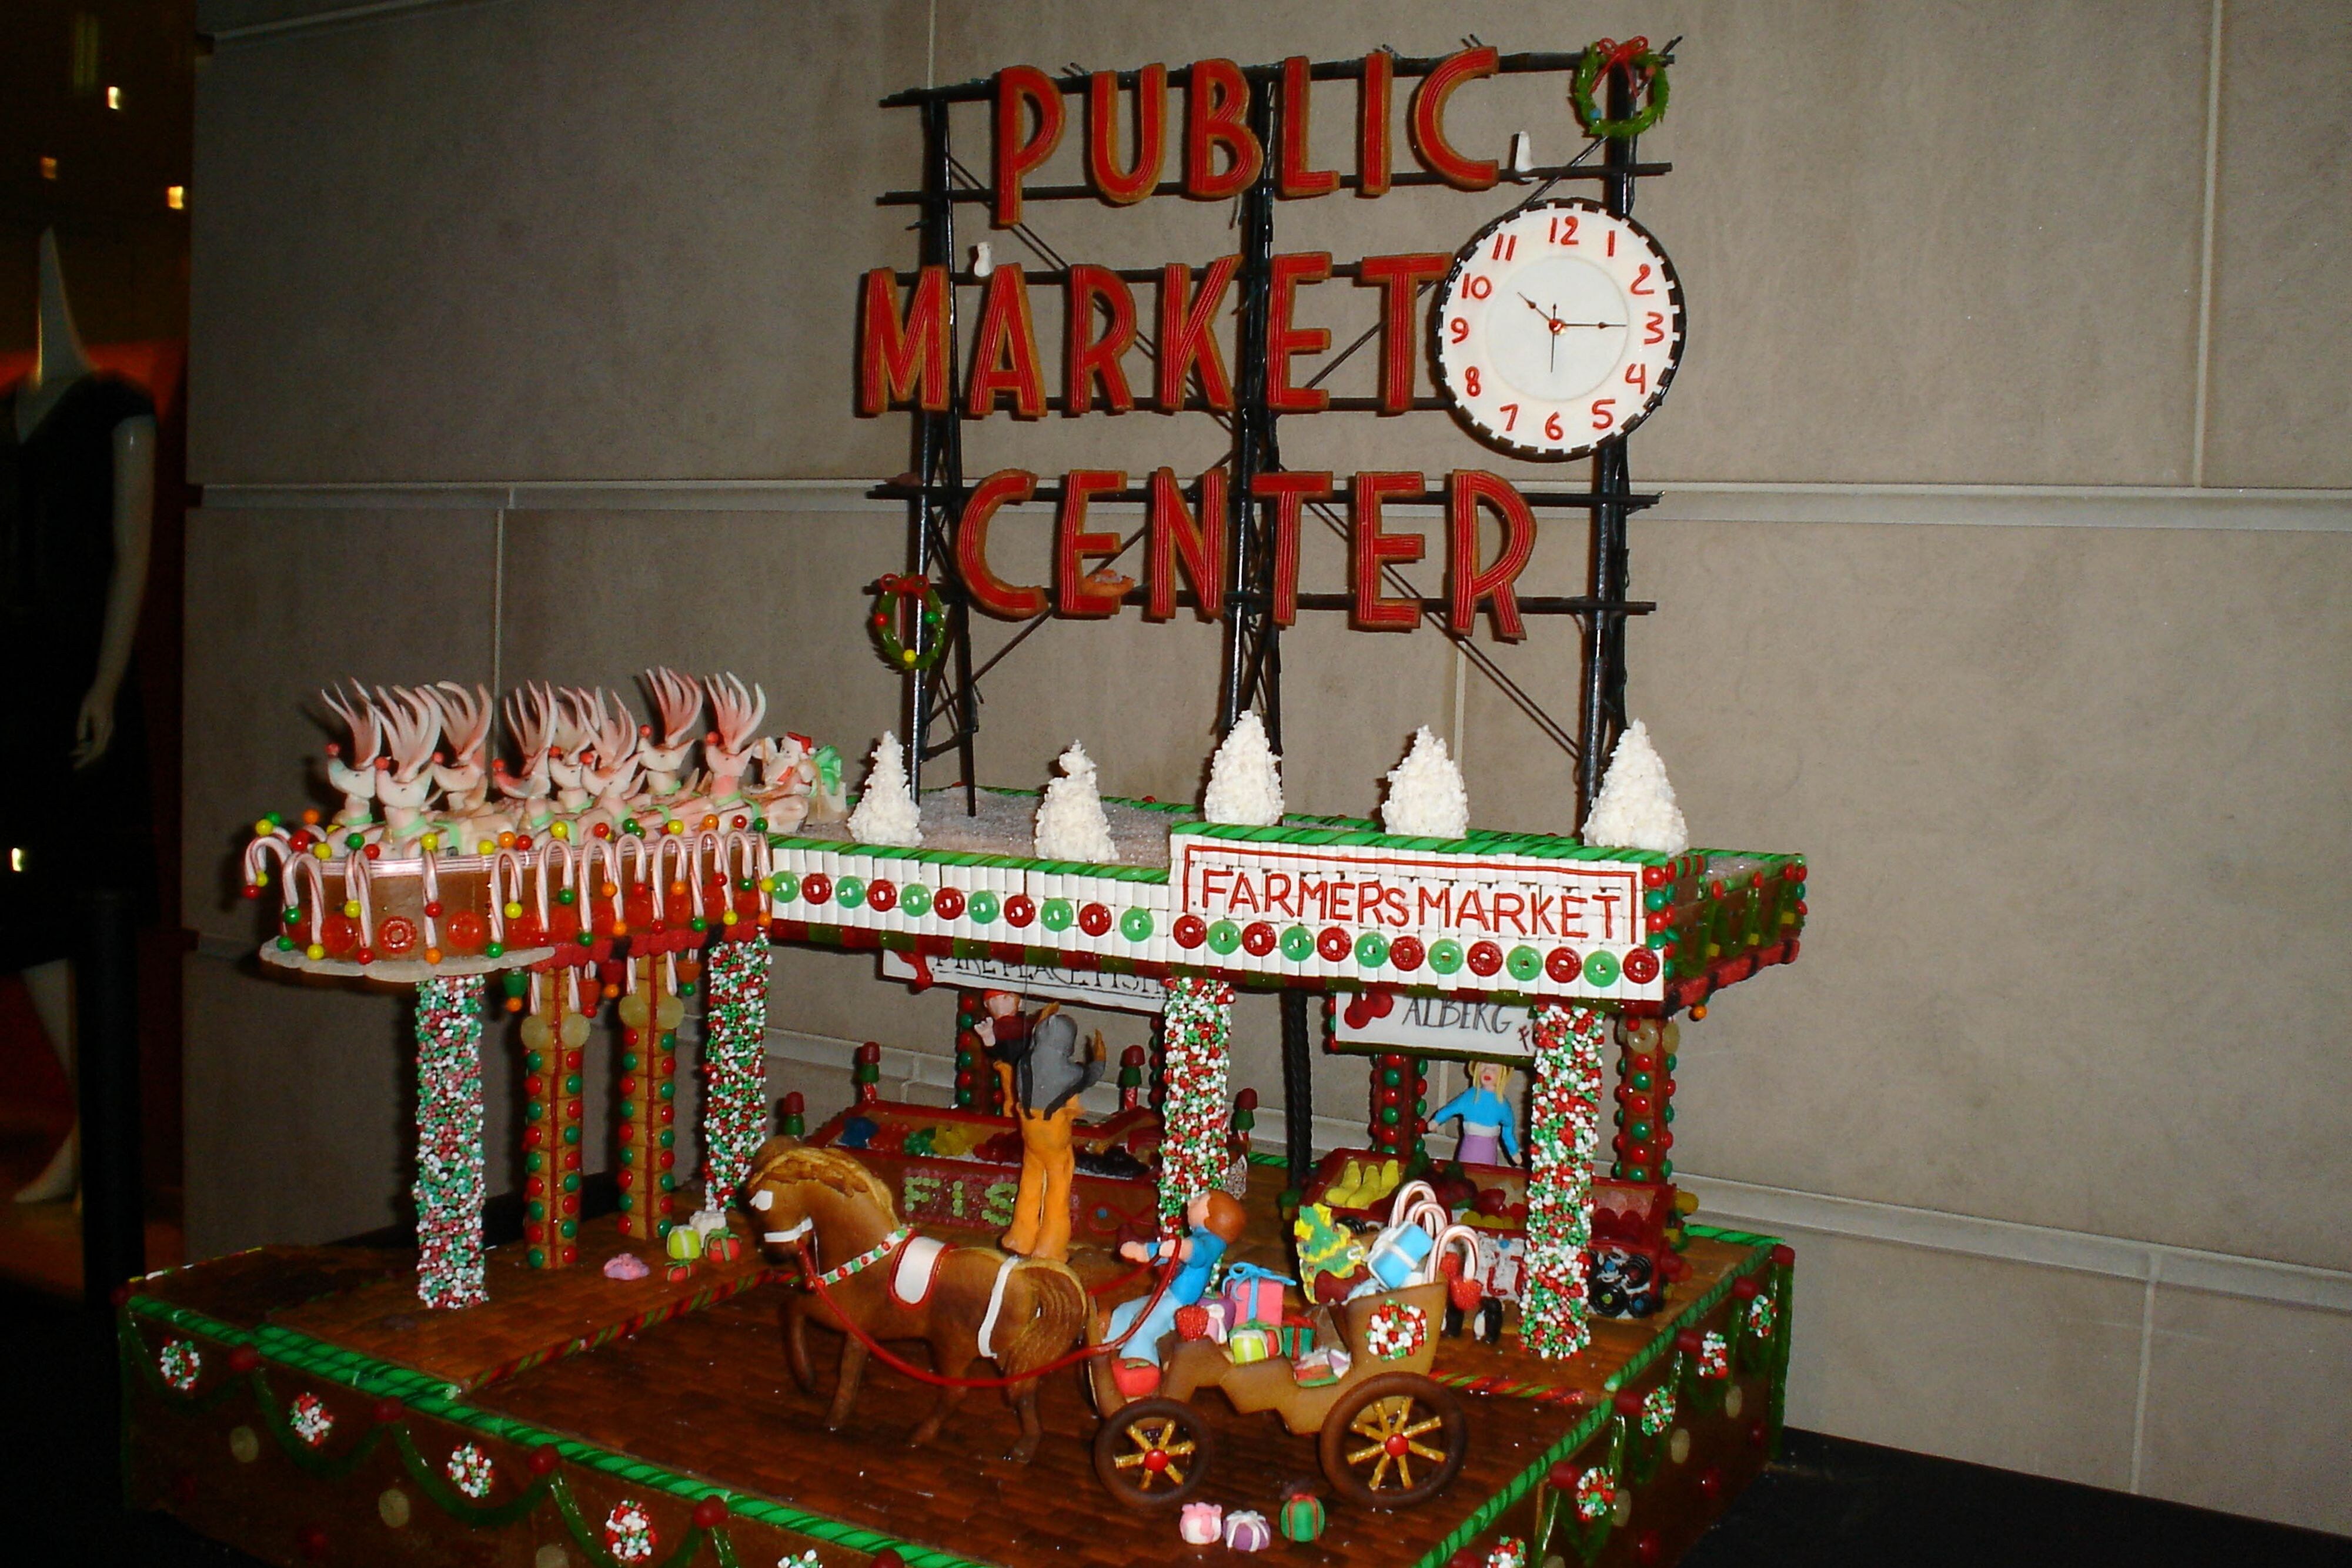 Pikes Peak Market made out of Gingerbread